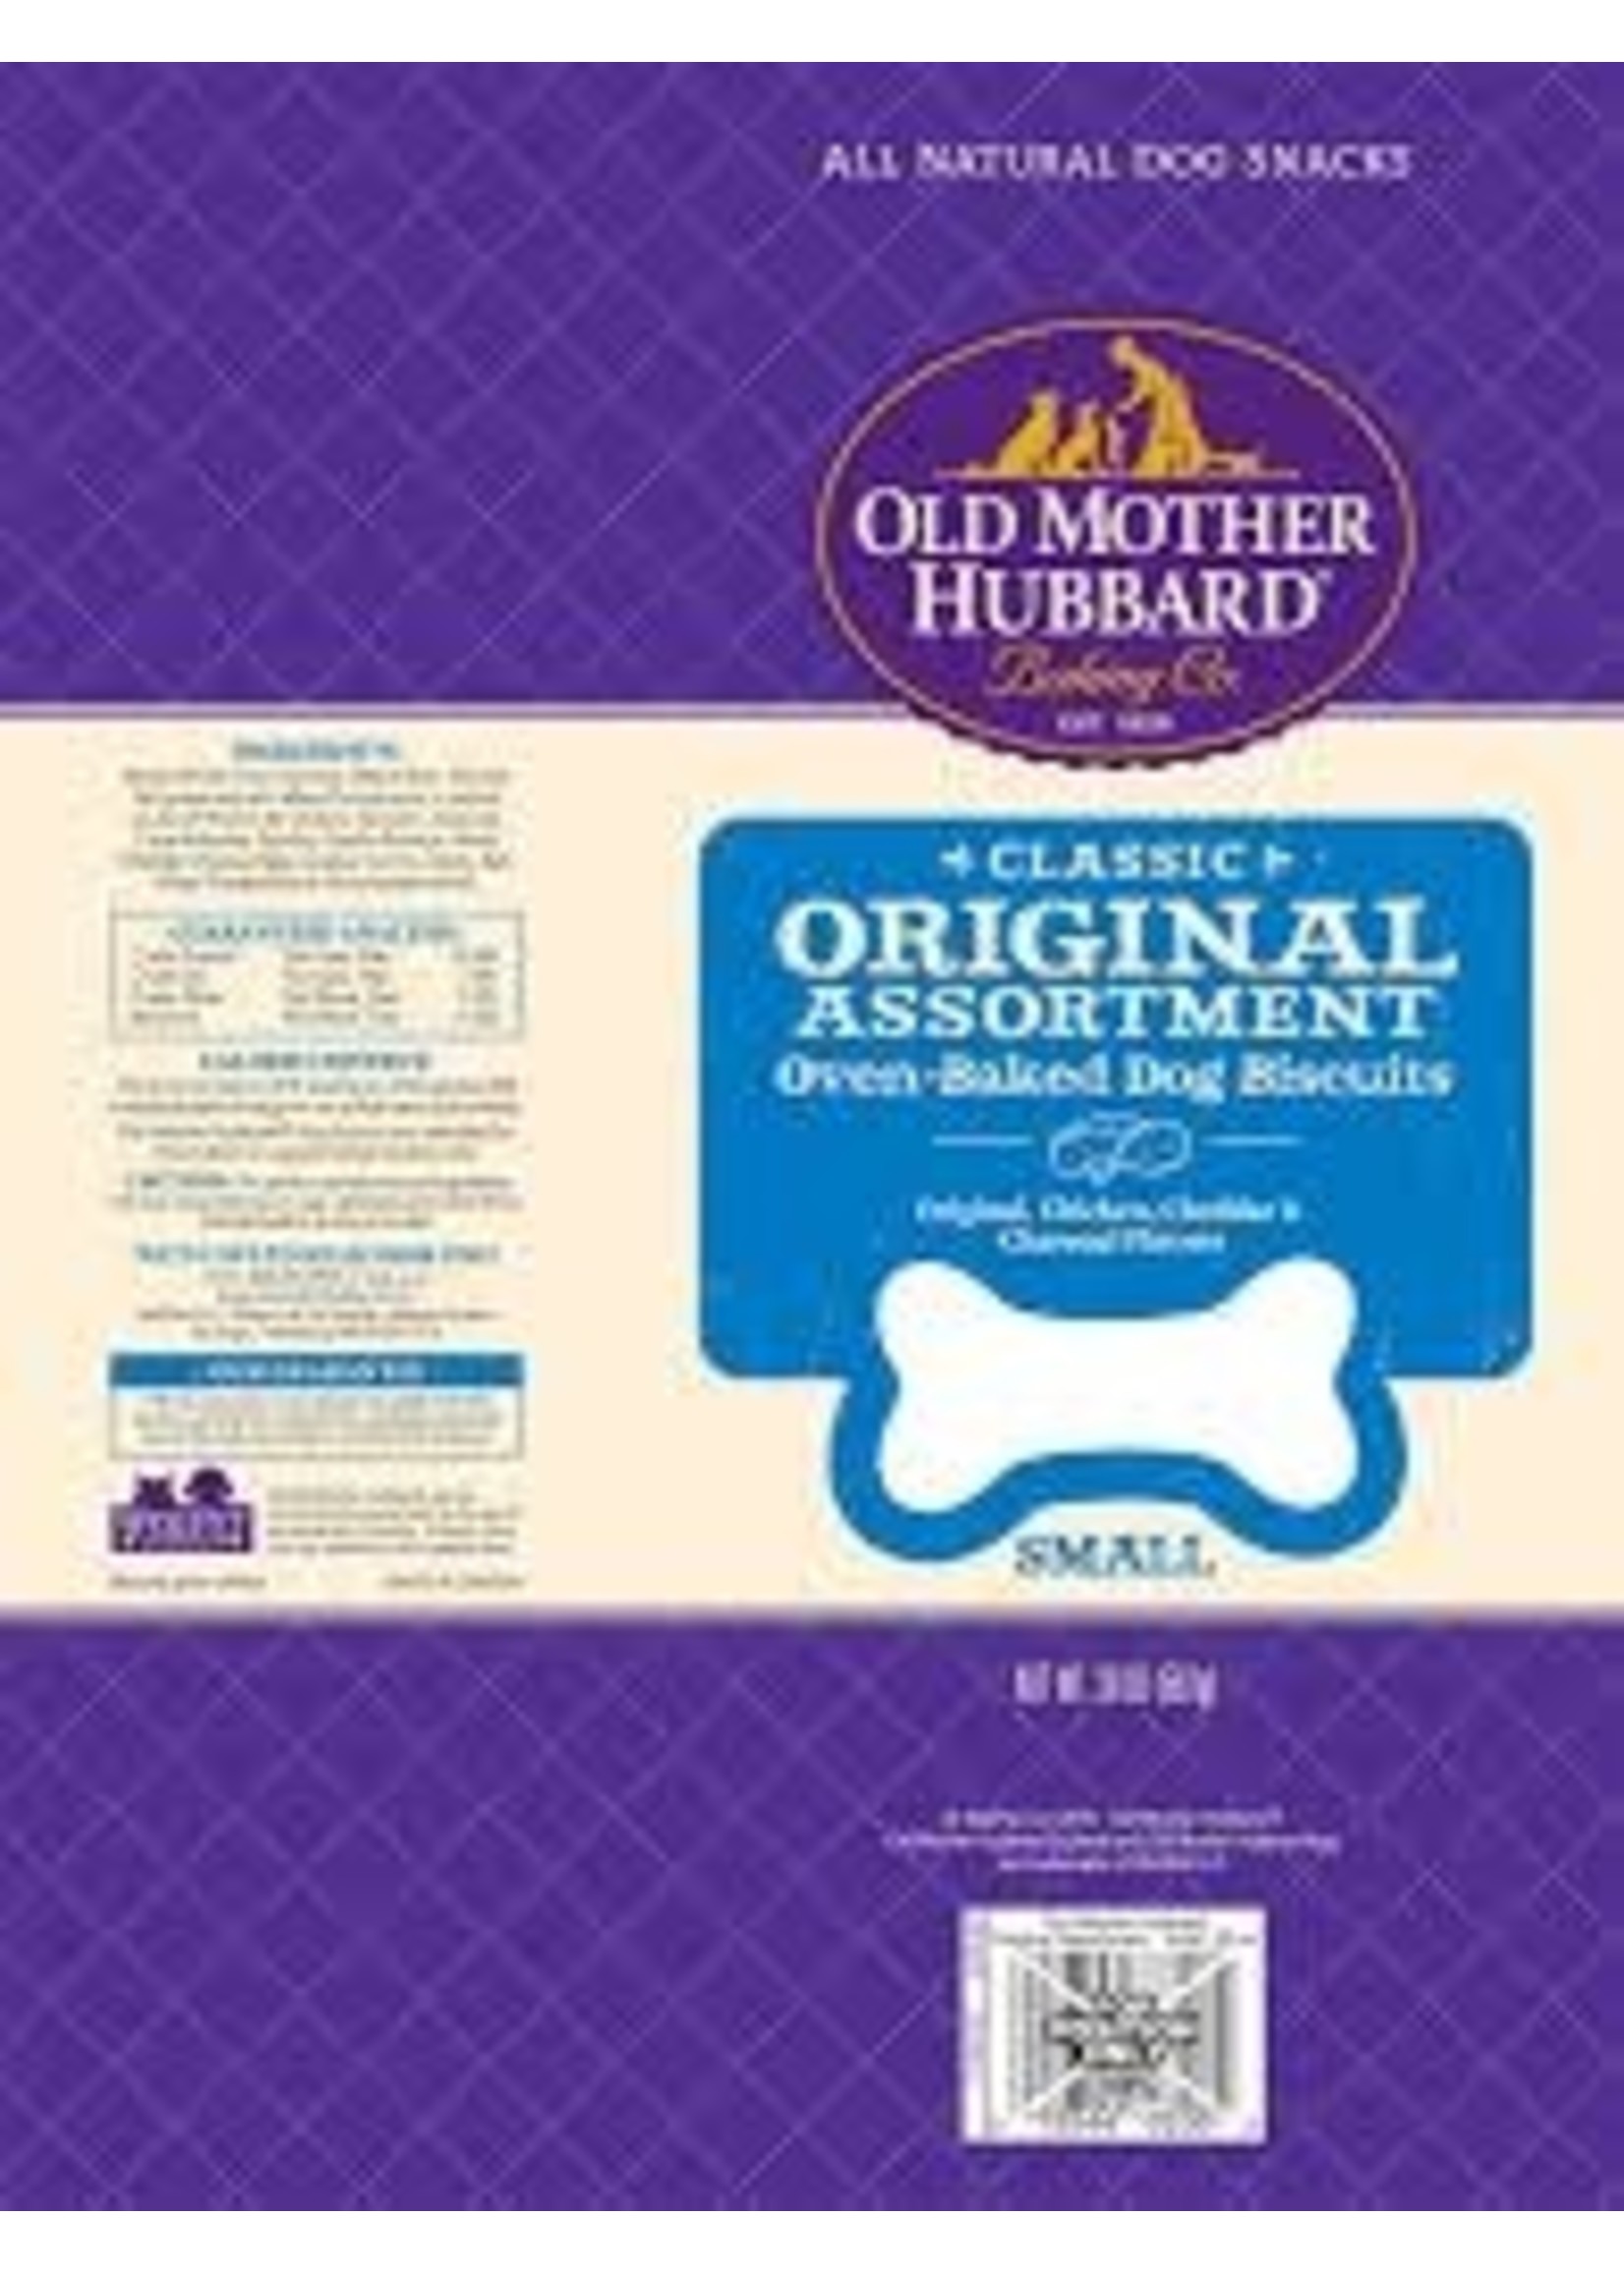 Old Mother Hubbard Baking Co. Old Mother Hubbard Baking Co.